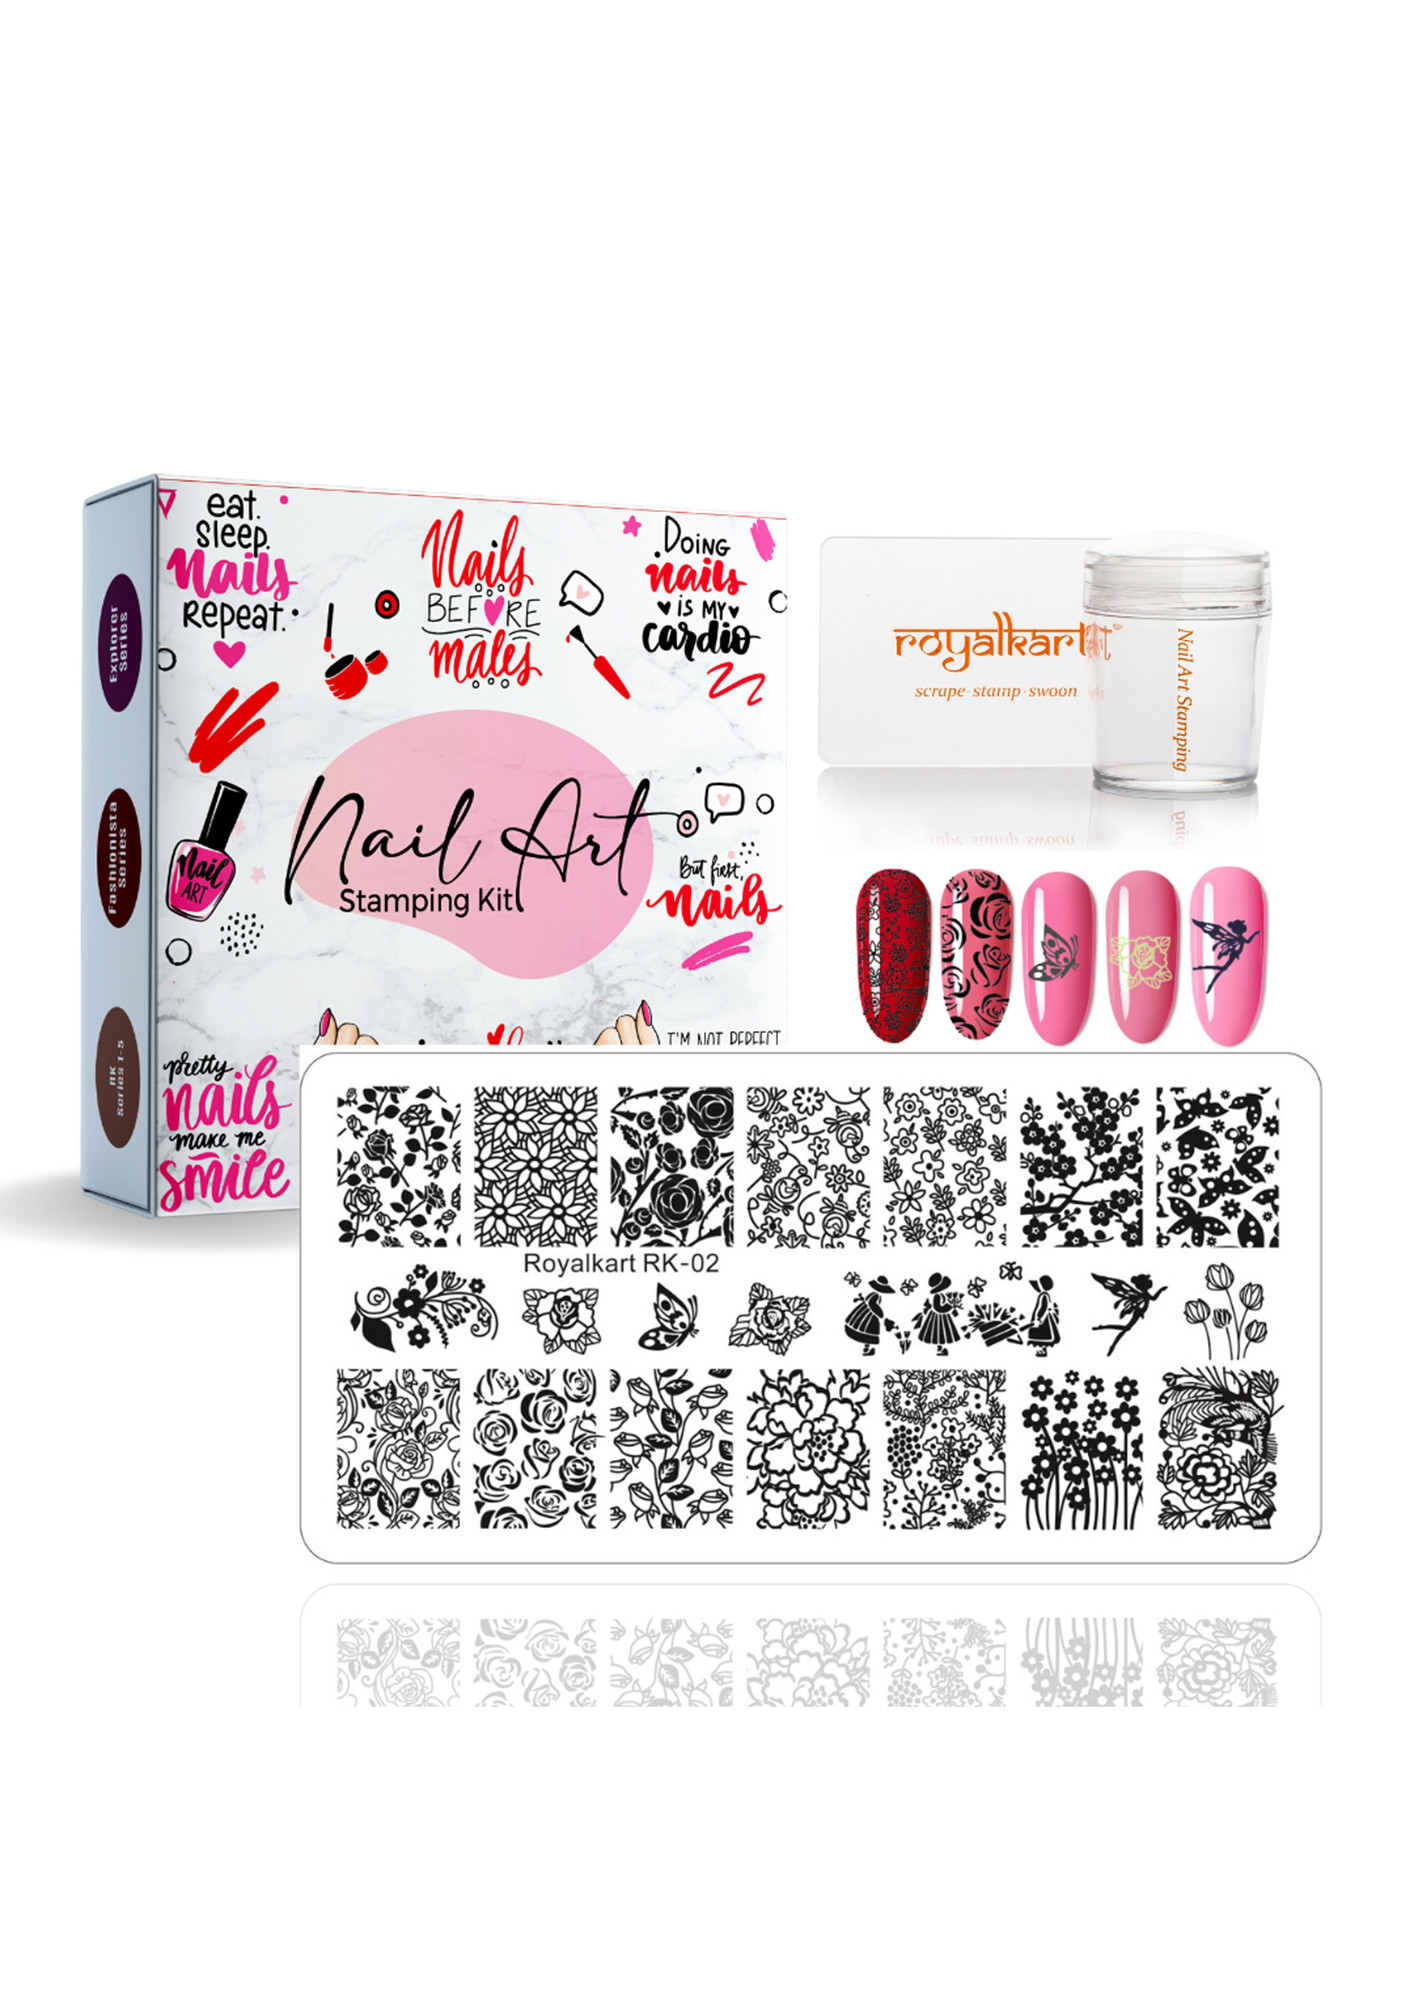 CLEAR SILICONE NAIL STAMPER — ATN Nail Supply